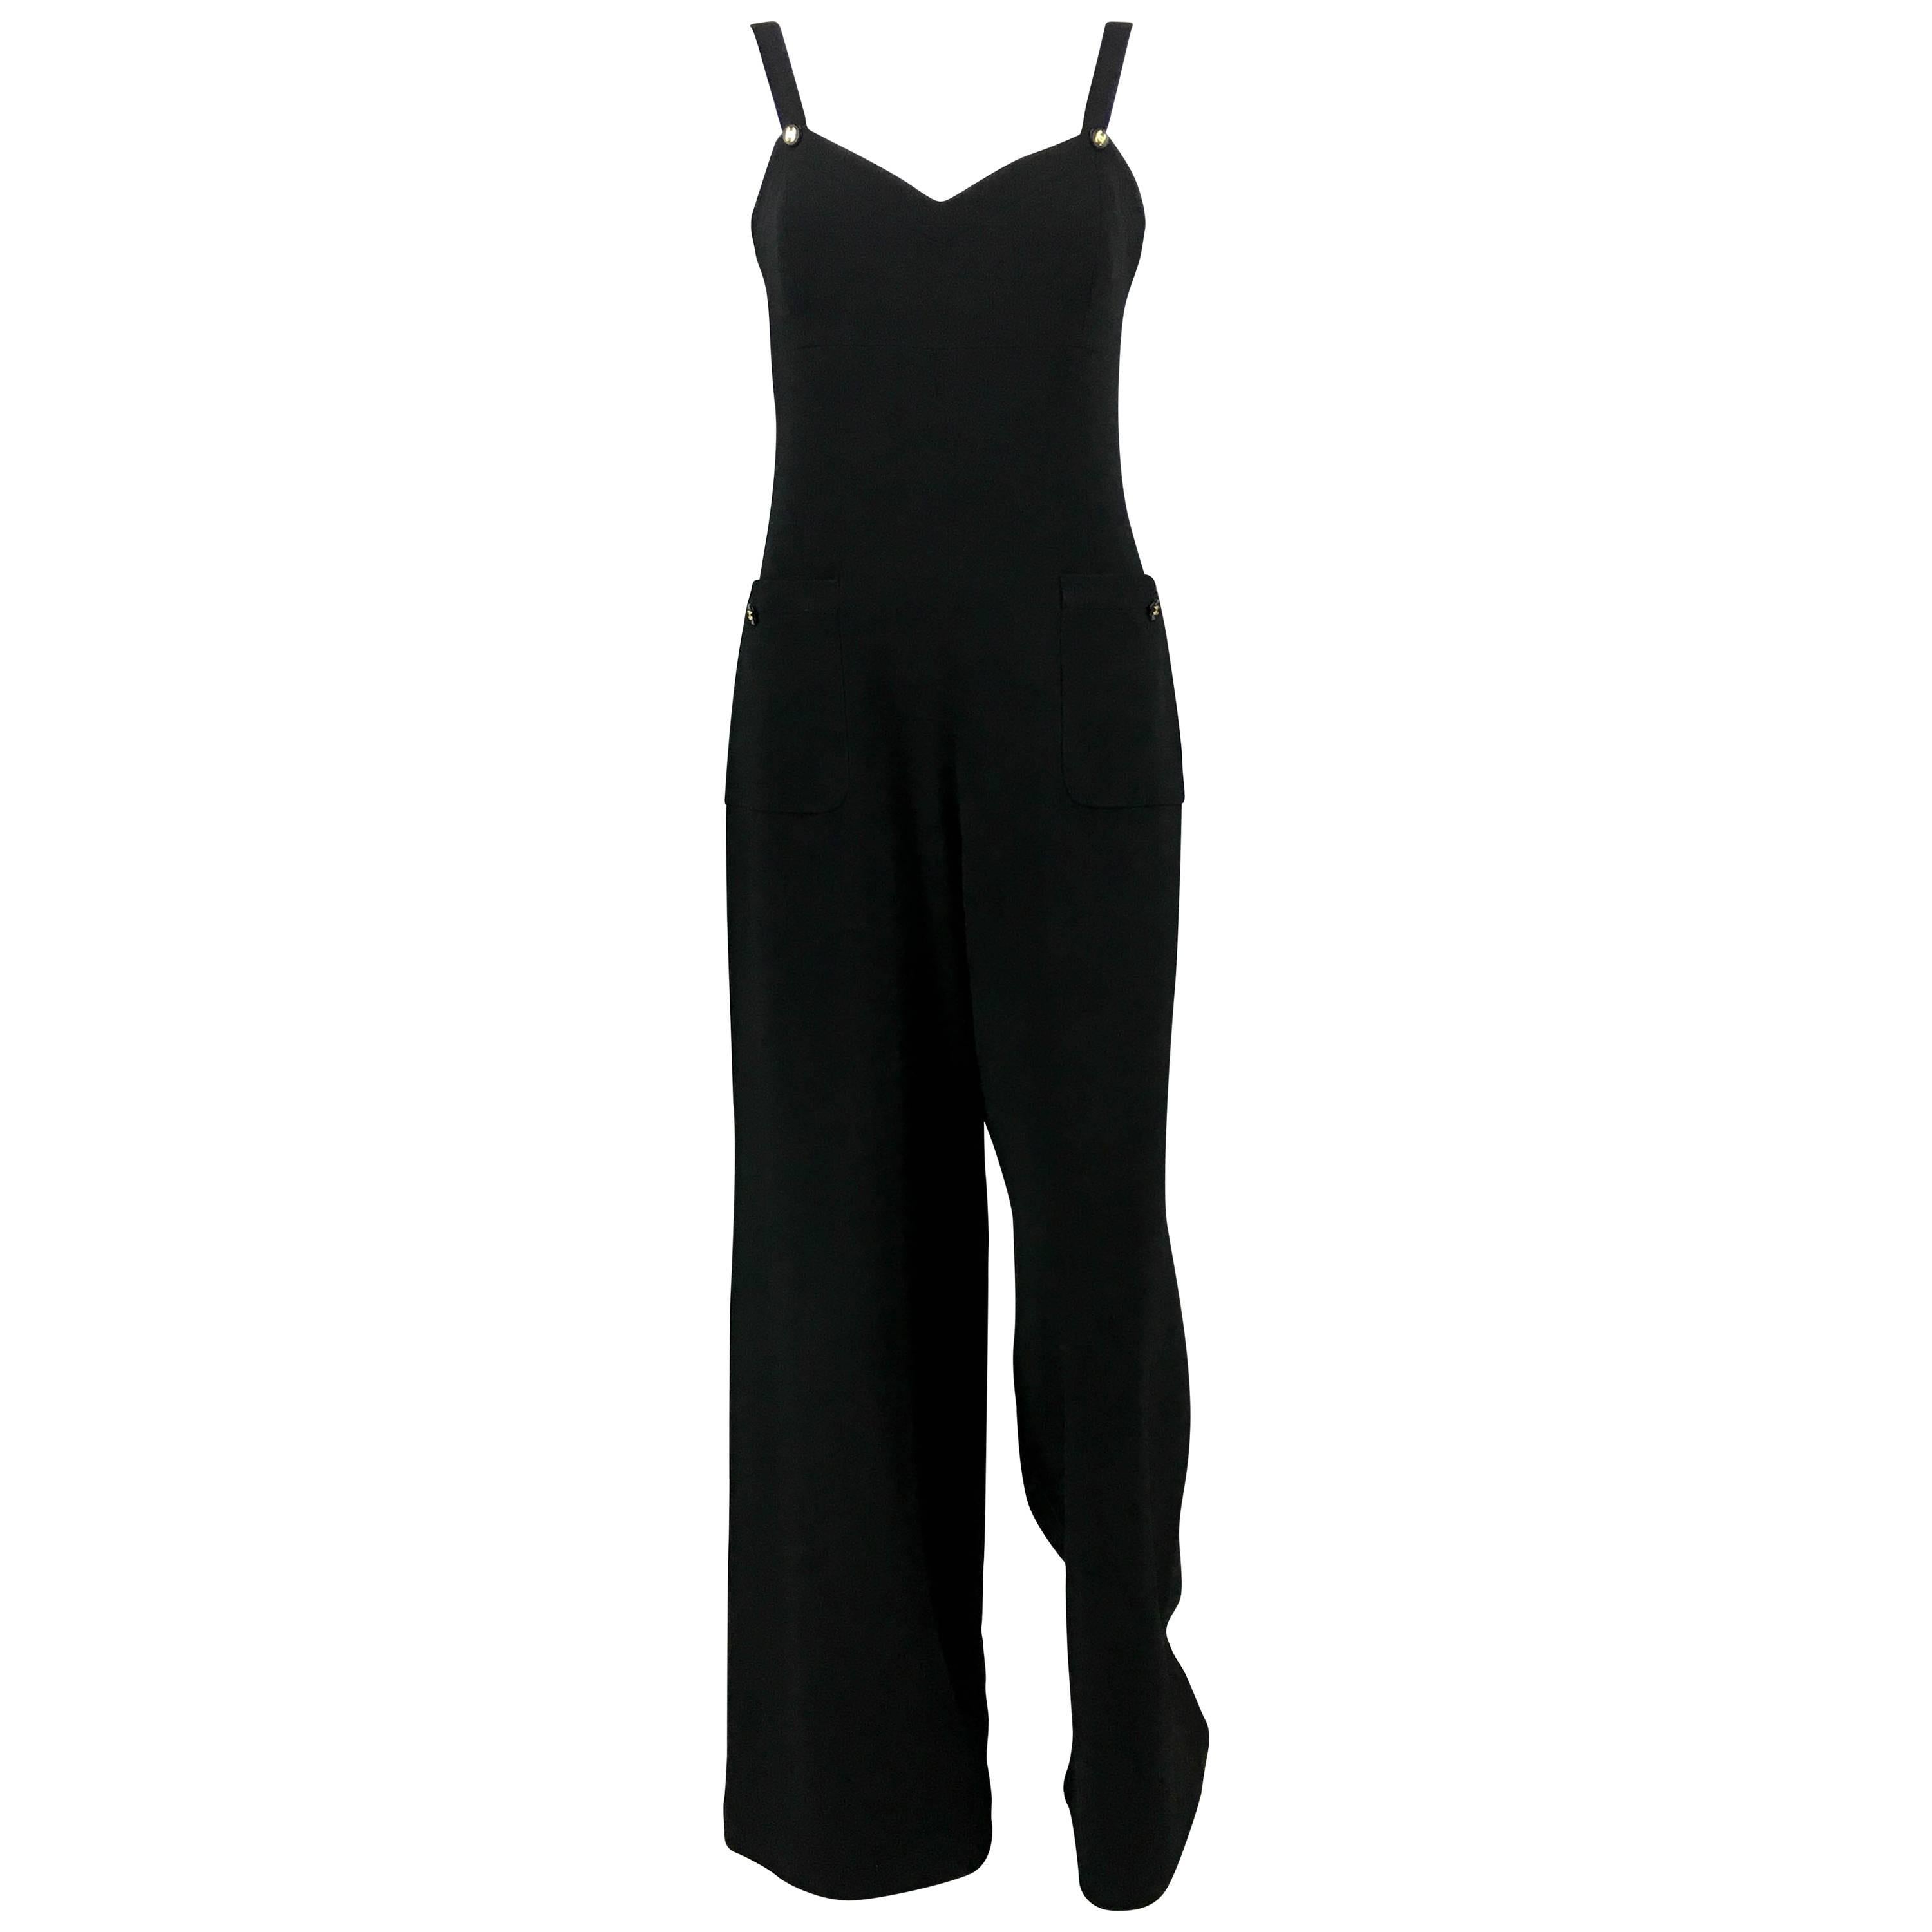 1995 Chanel Dungaree-Style Black Wool Jumpsuit